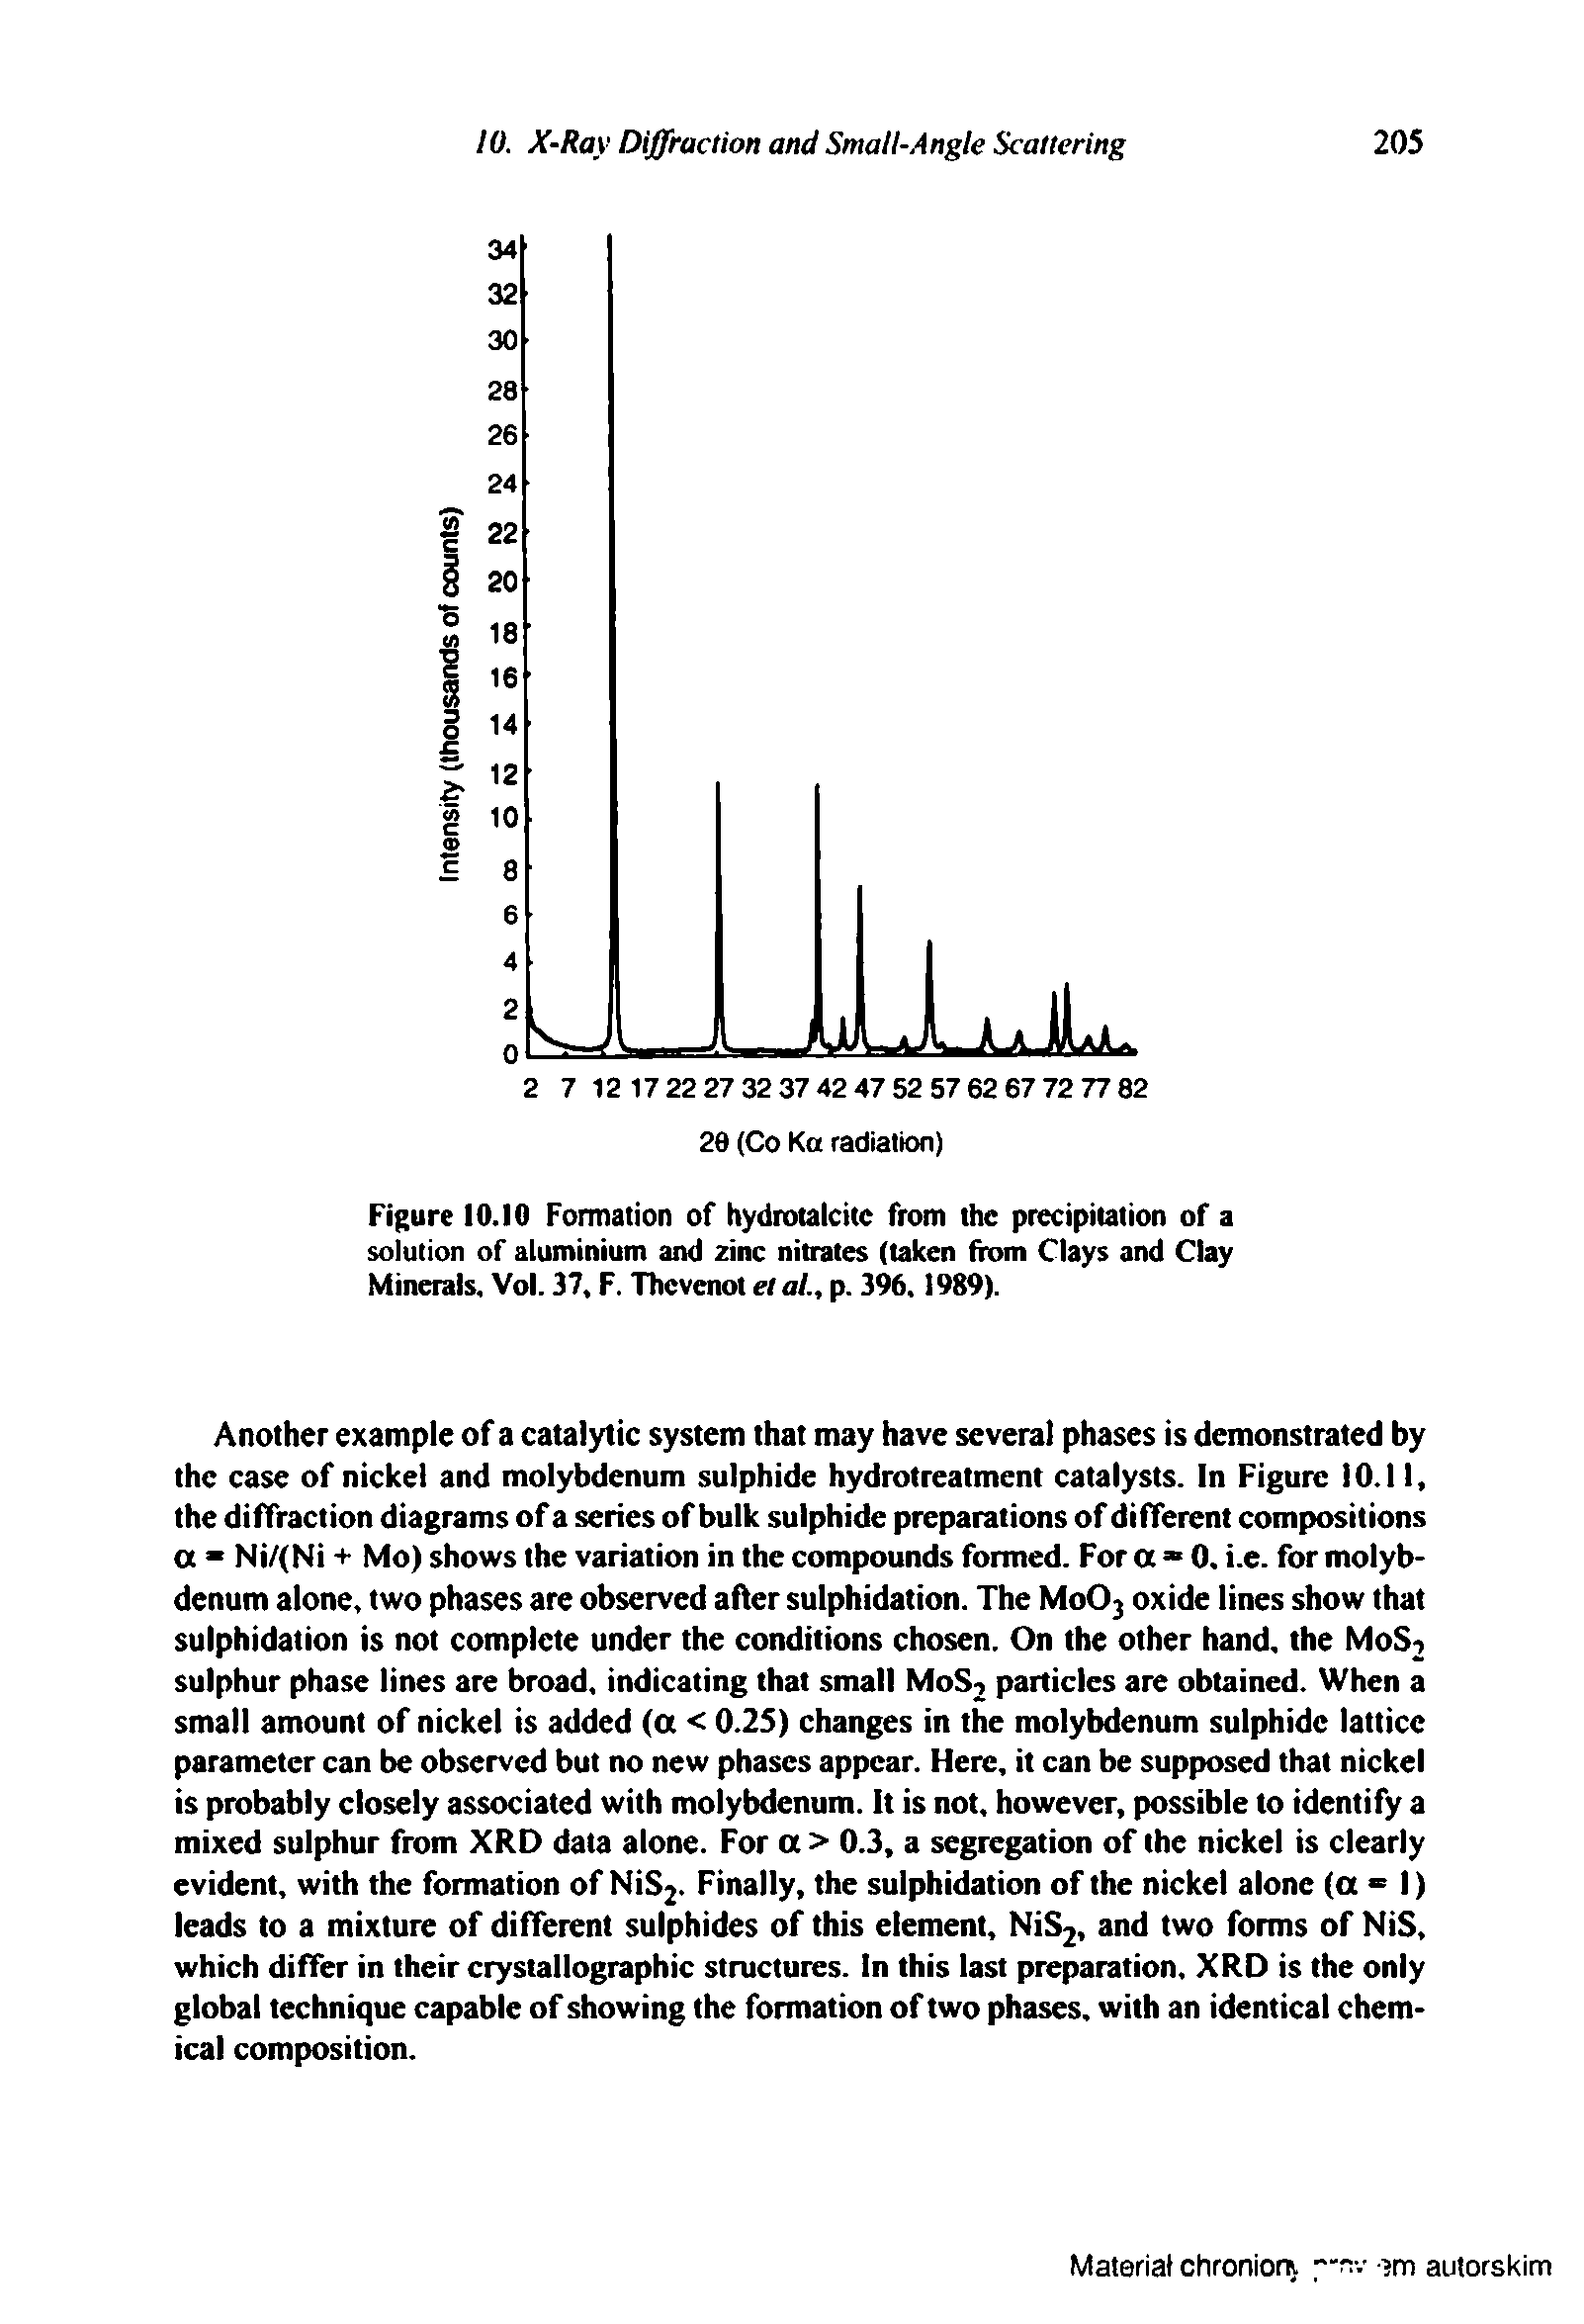 Figure 10.10 Formation of hydrotaldtc from the precipitation of a solution of aluminium and zinc nitrates (taken from Clays and Clay Minerals. Vol. 37 F. Thcvcnot e/a/., p. 396,1989).